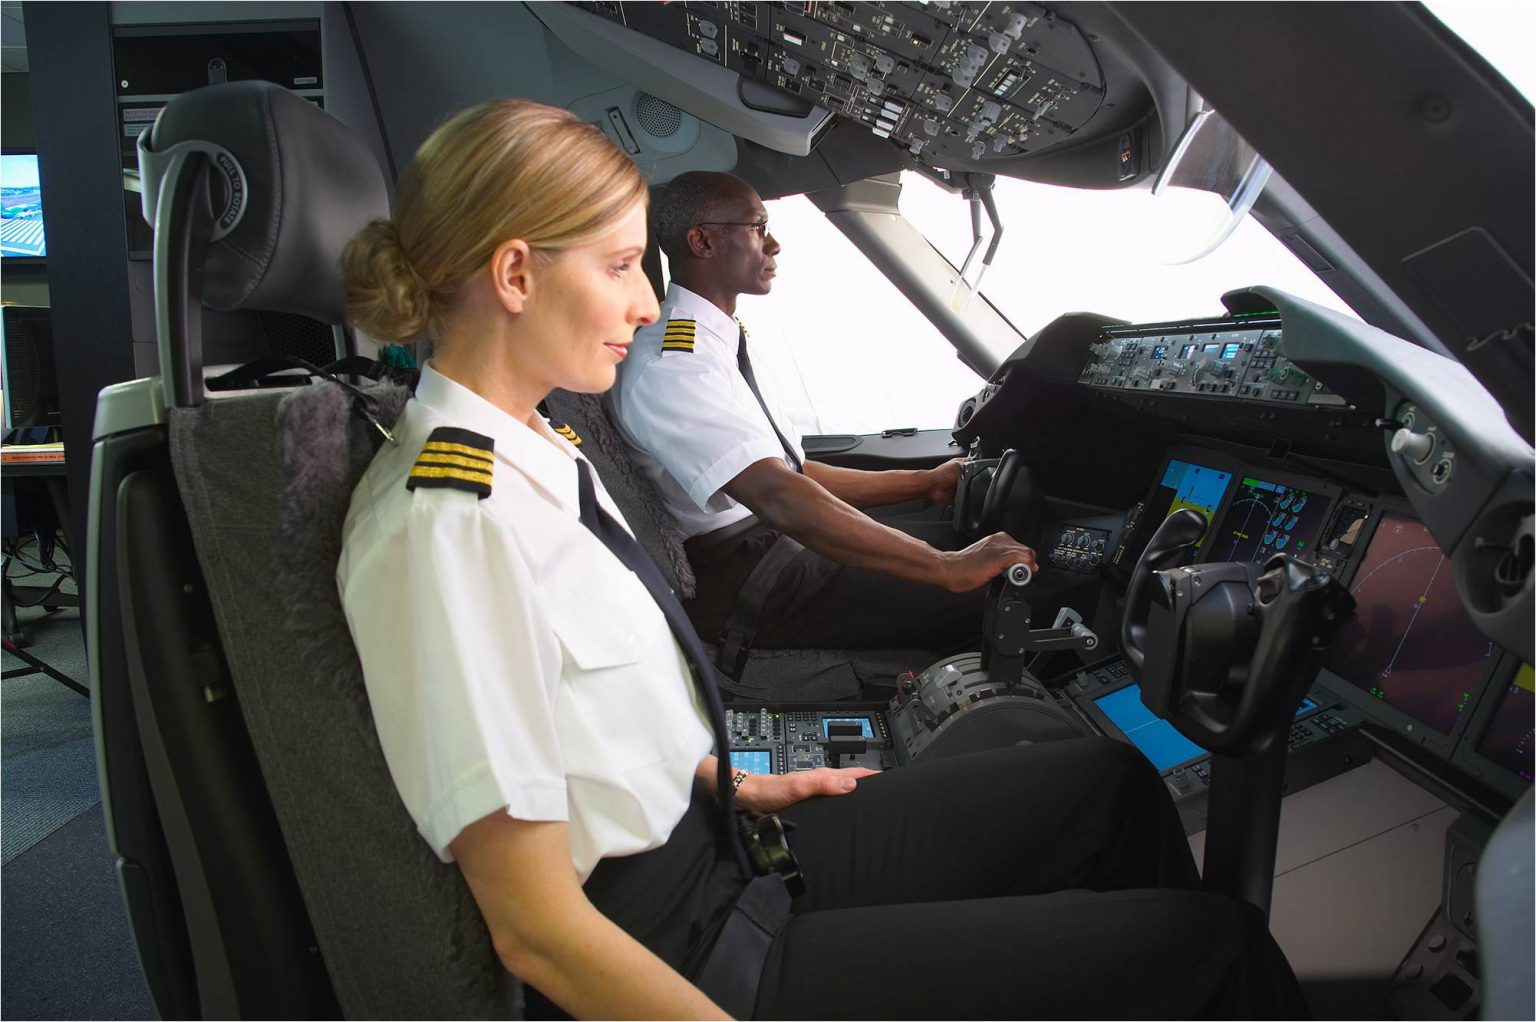 Boeing Highlights The Need For More Women Pilots In Latest Pilot 